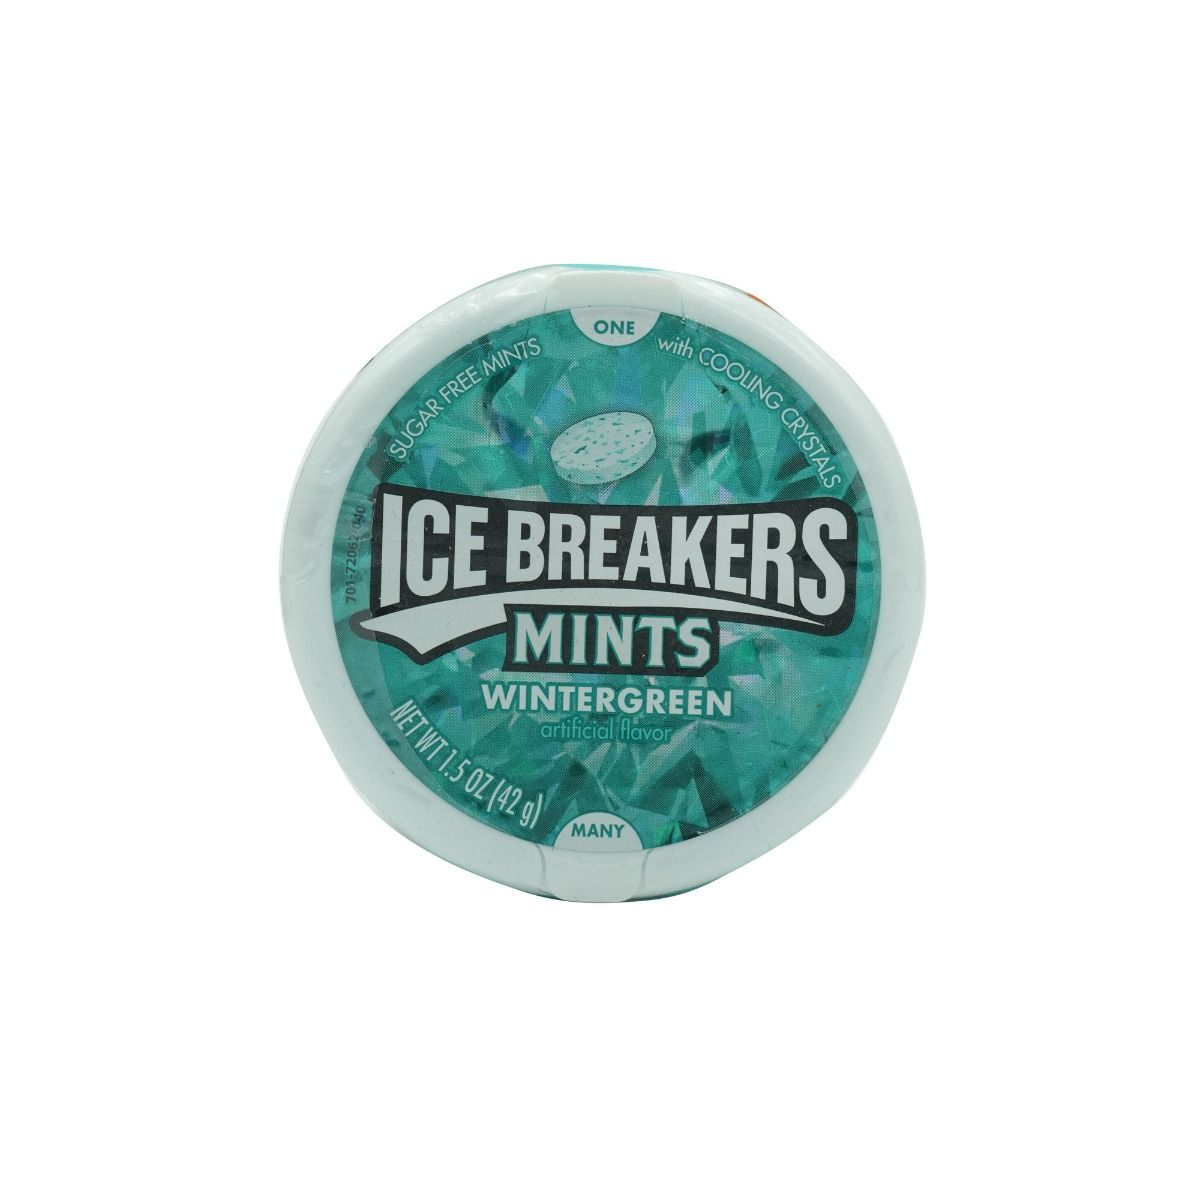 Ice Breaker Sugarfree Wintermint Mouth Freshner Mints, 42 gm, Pack of 1 